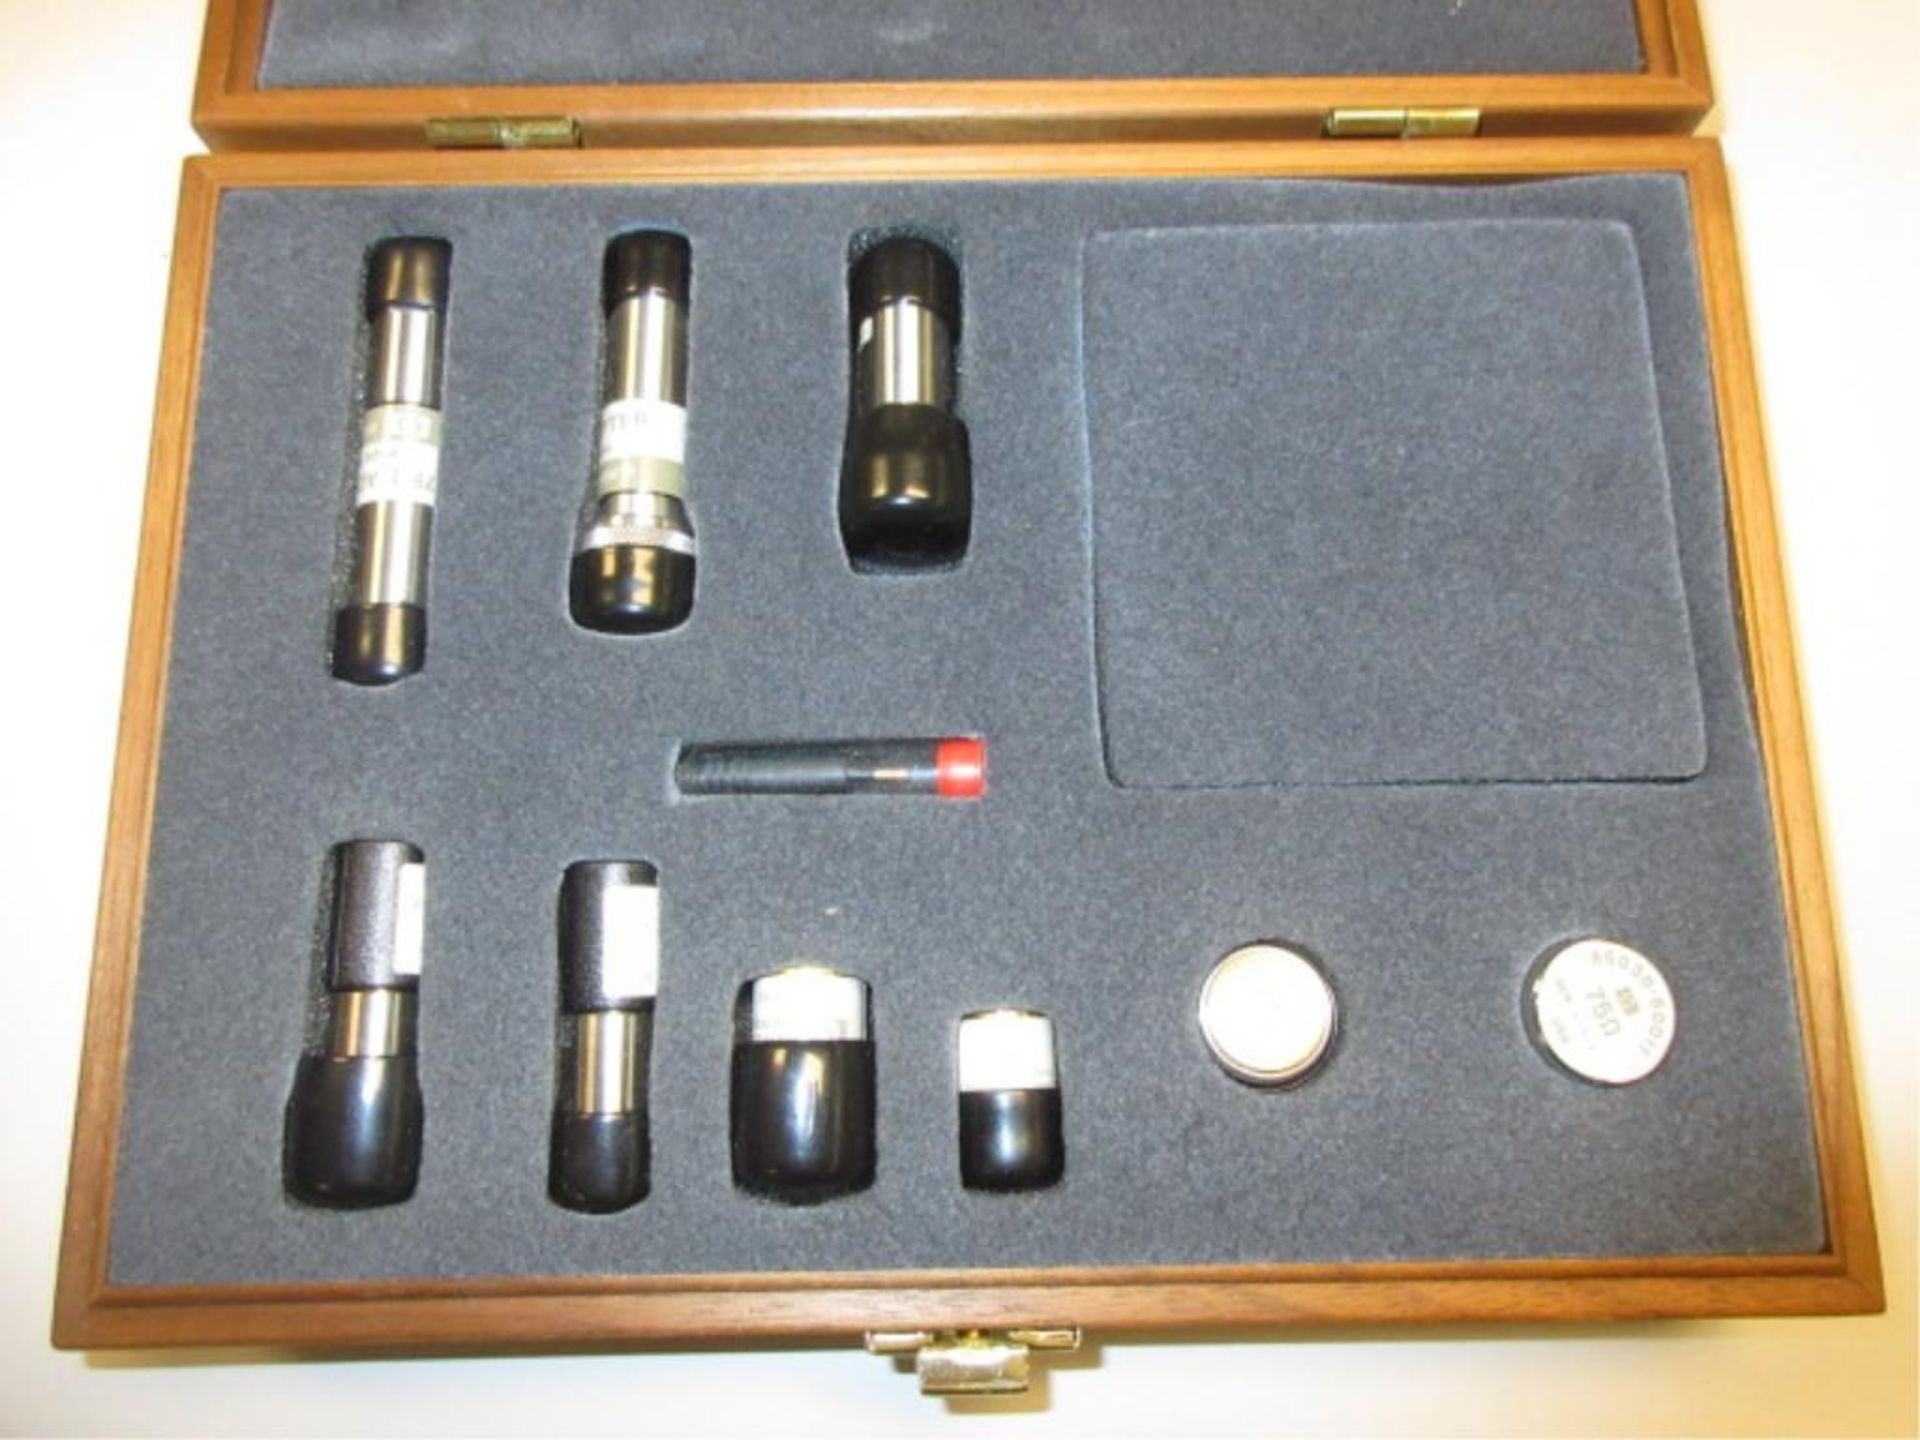 Hewlett Packard 85036B Calibration Kit. 75 Ohm Calibration Kit, in wood case. Asset# A16810. HIT# - Image 2 of 2